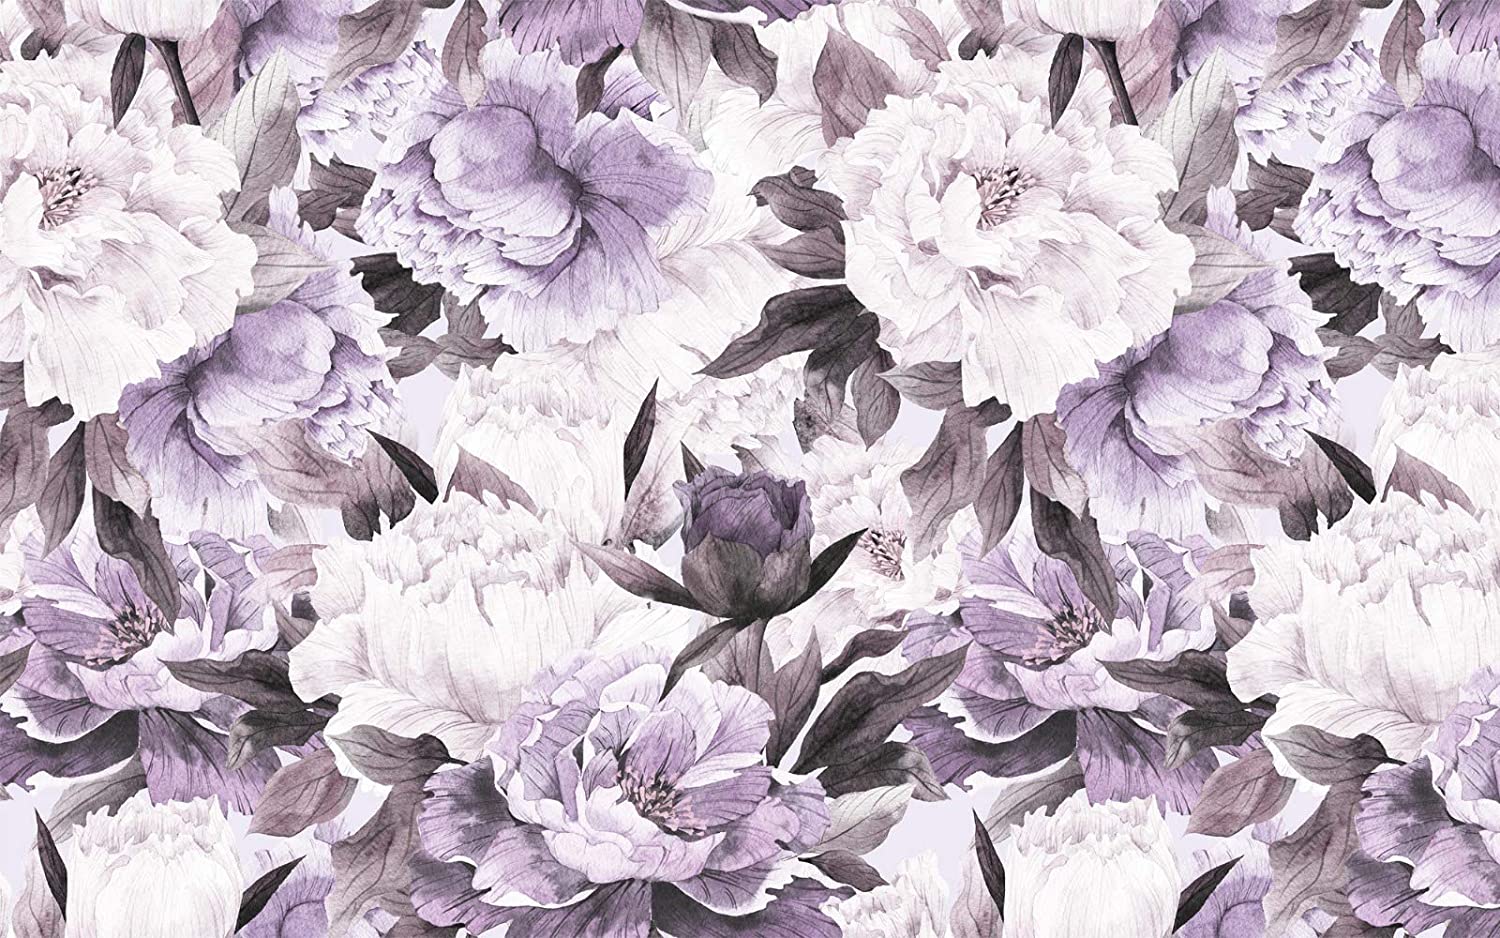 Muraviewall Big Flowers White and Purple Flowers Wallpaper, Print Painting, Home Decor, Wall Decor, Removable Peel and Stick Wallpaper, Office Wallpaper, Living room Wallpaper I Custom Size, Handmade Products